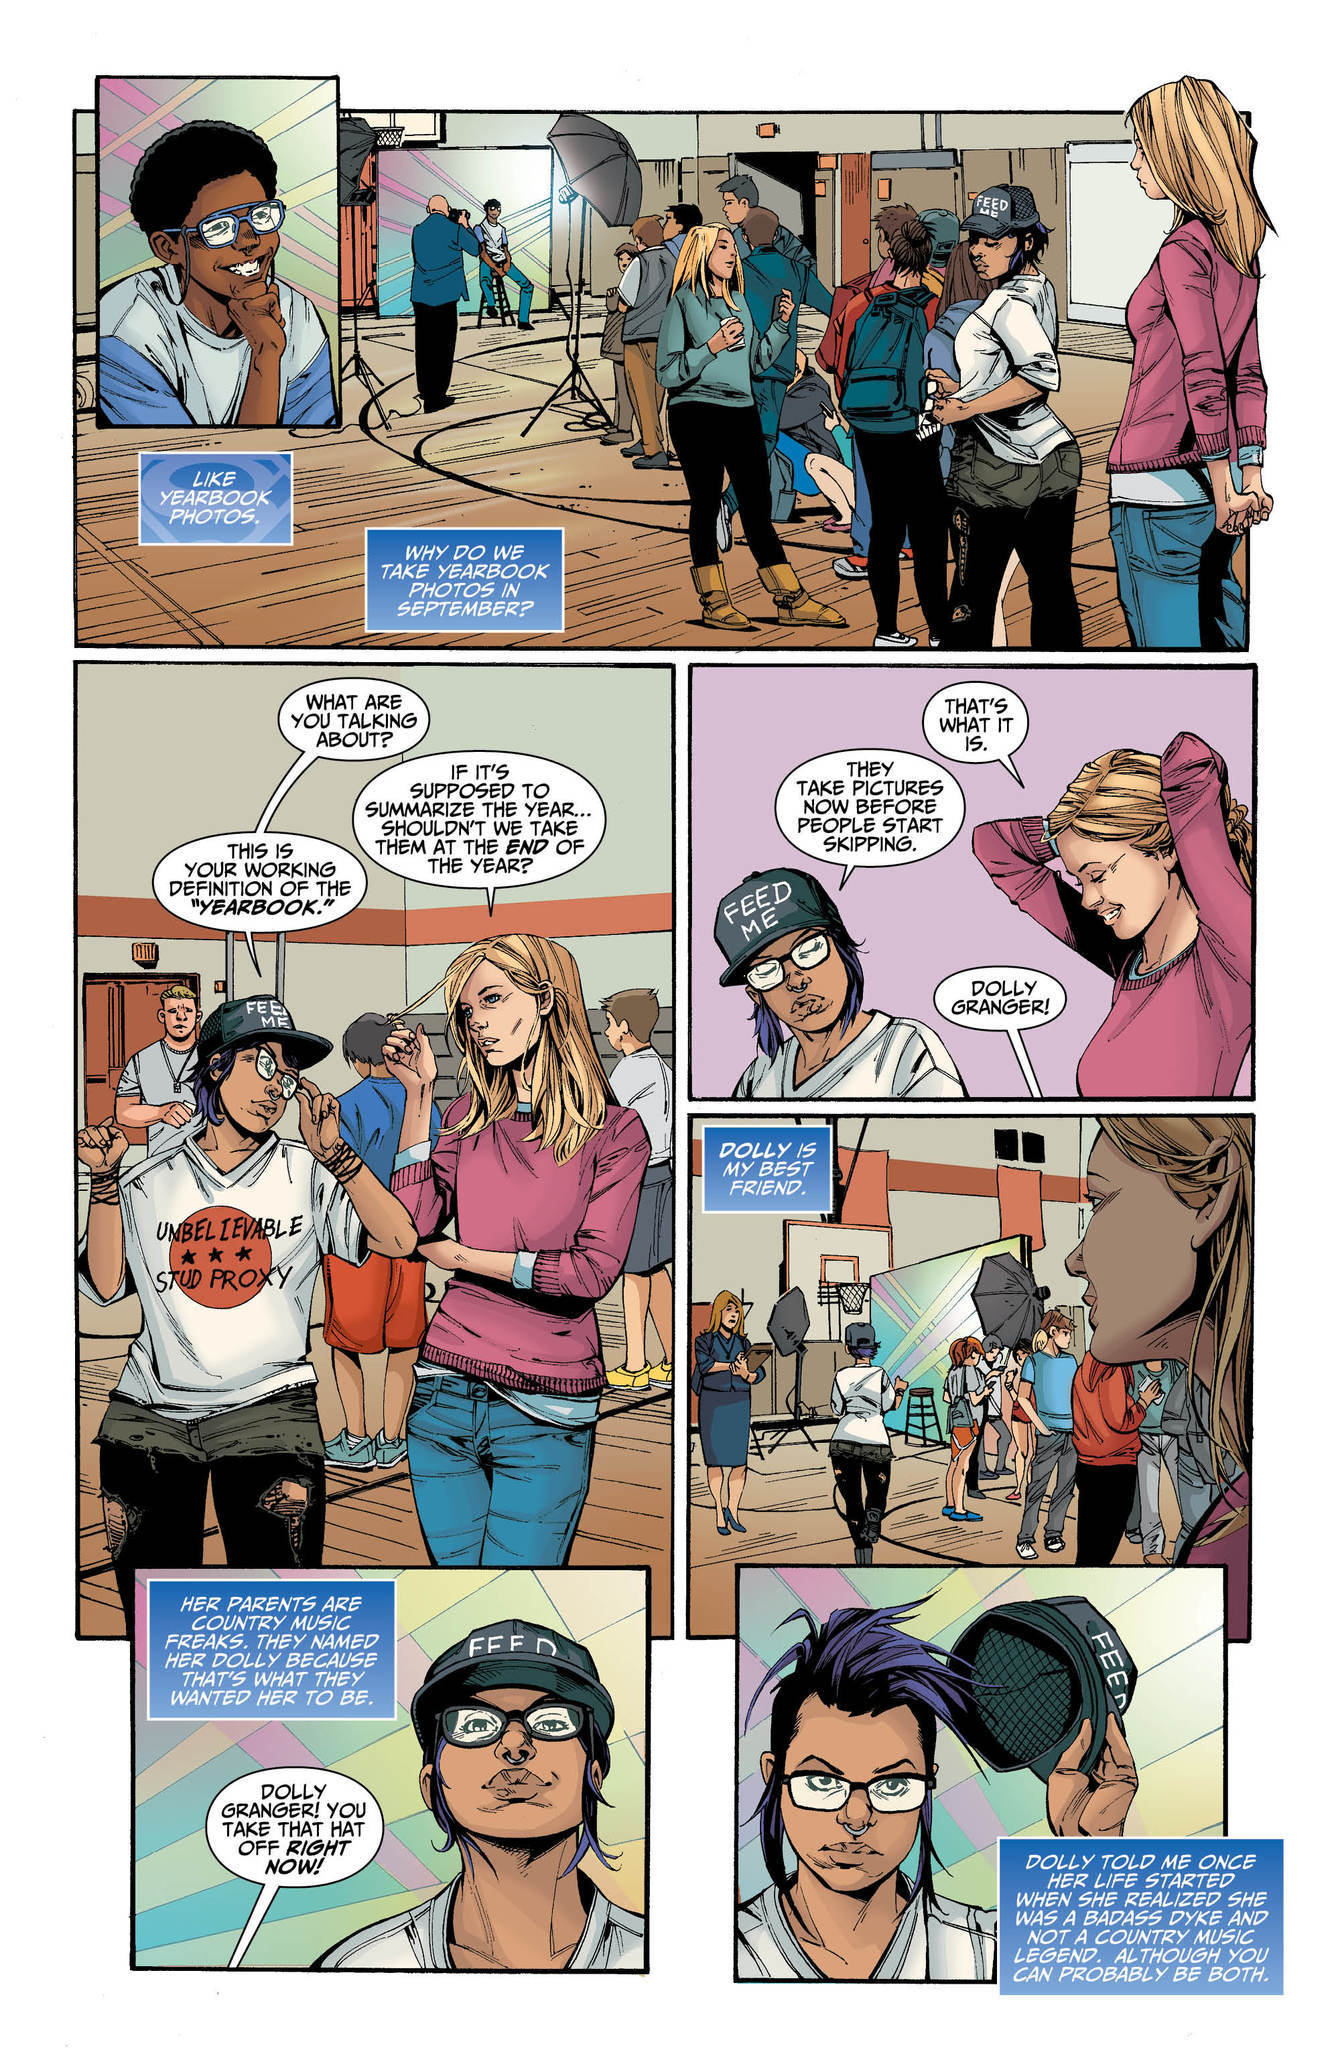 An image from "Supergirl: Being Super" by writer Mariko Tamaki and artist Jolle Jones.